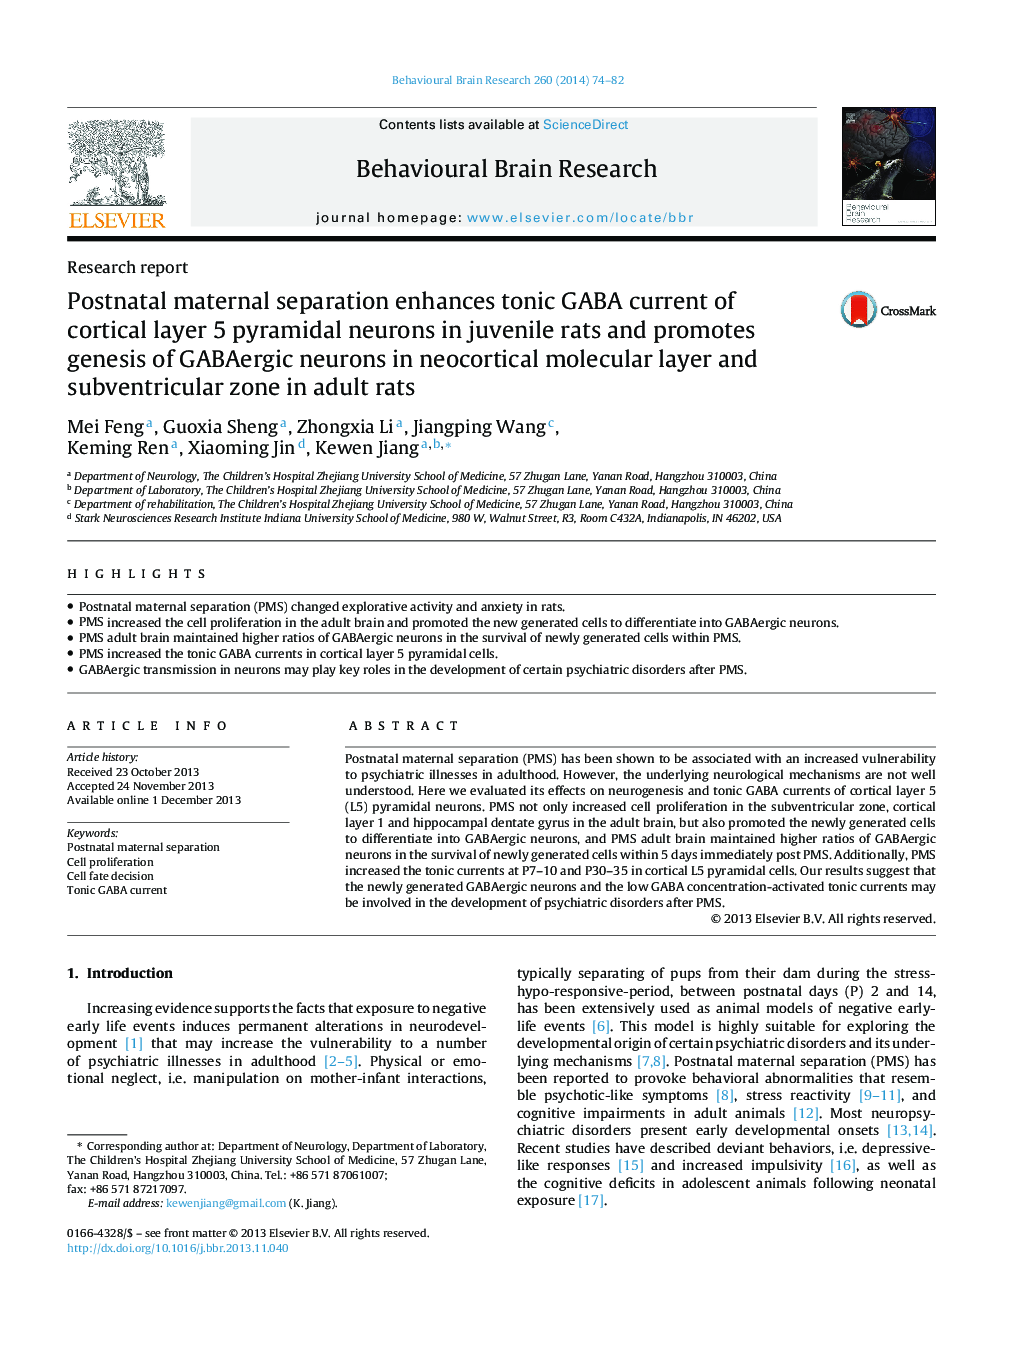 Postnatal maternal separation enhances tonic GABA current of cortical layer 5 pyramidal neurons in juvenile rats and promotes genesis of GABAergic neurons in neocortical molecular layer and subventricular zone in adult rats